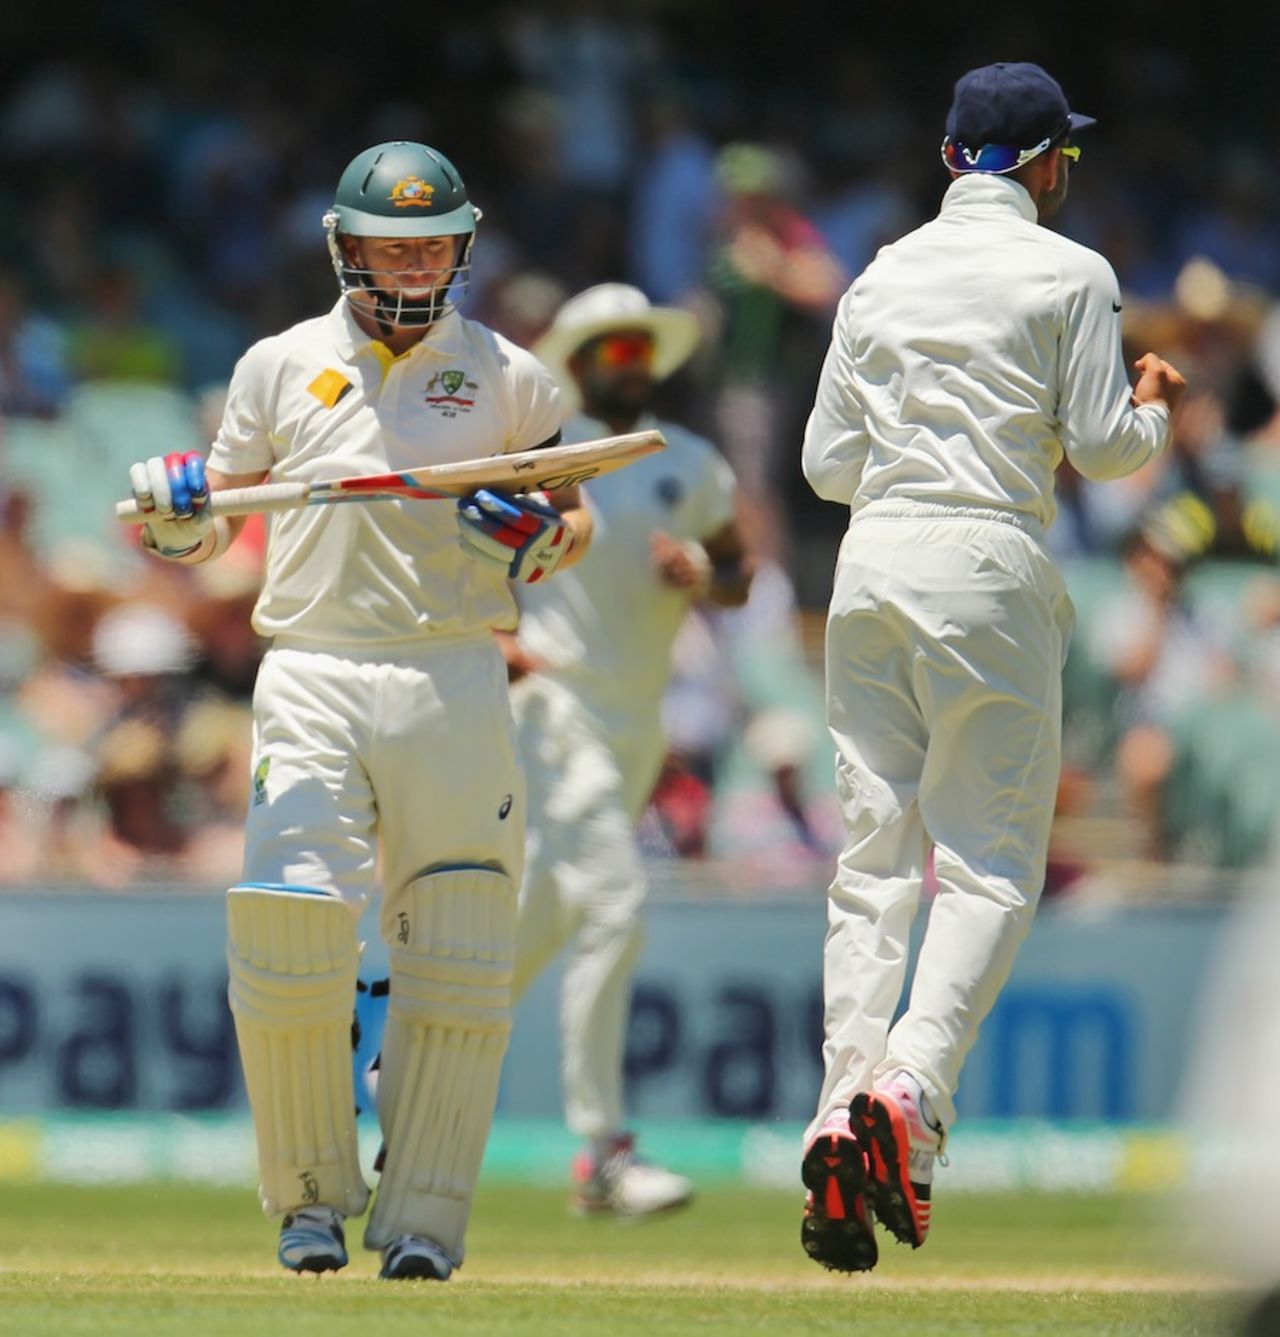 Chris Rogers fell soon after lunch, Australia v India, 1st Test, Adelaide, 4th day, December 12, 2014